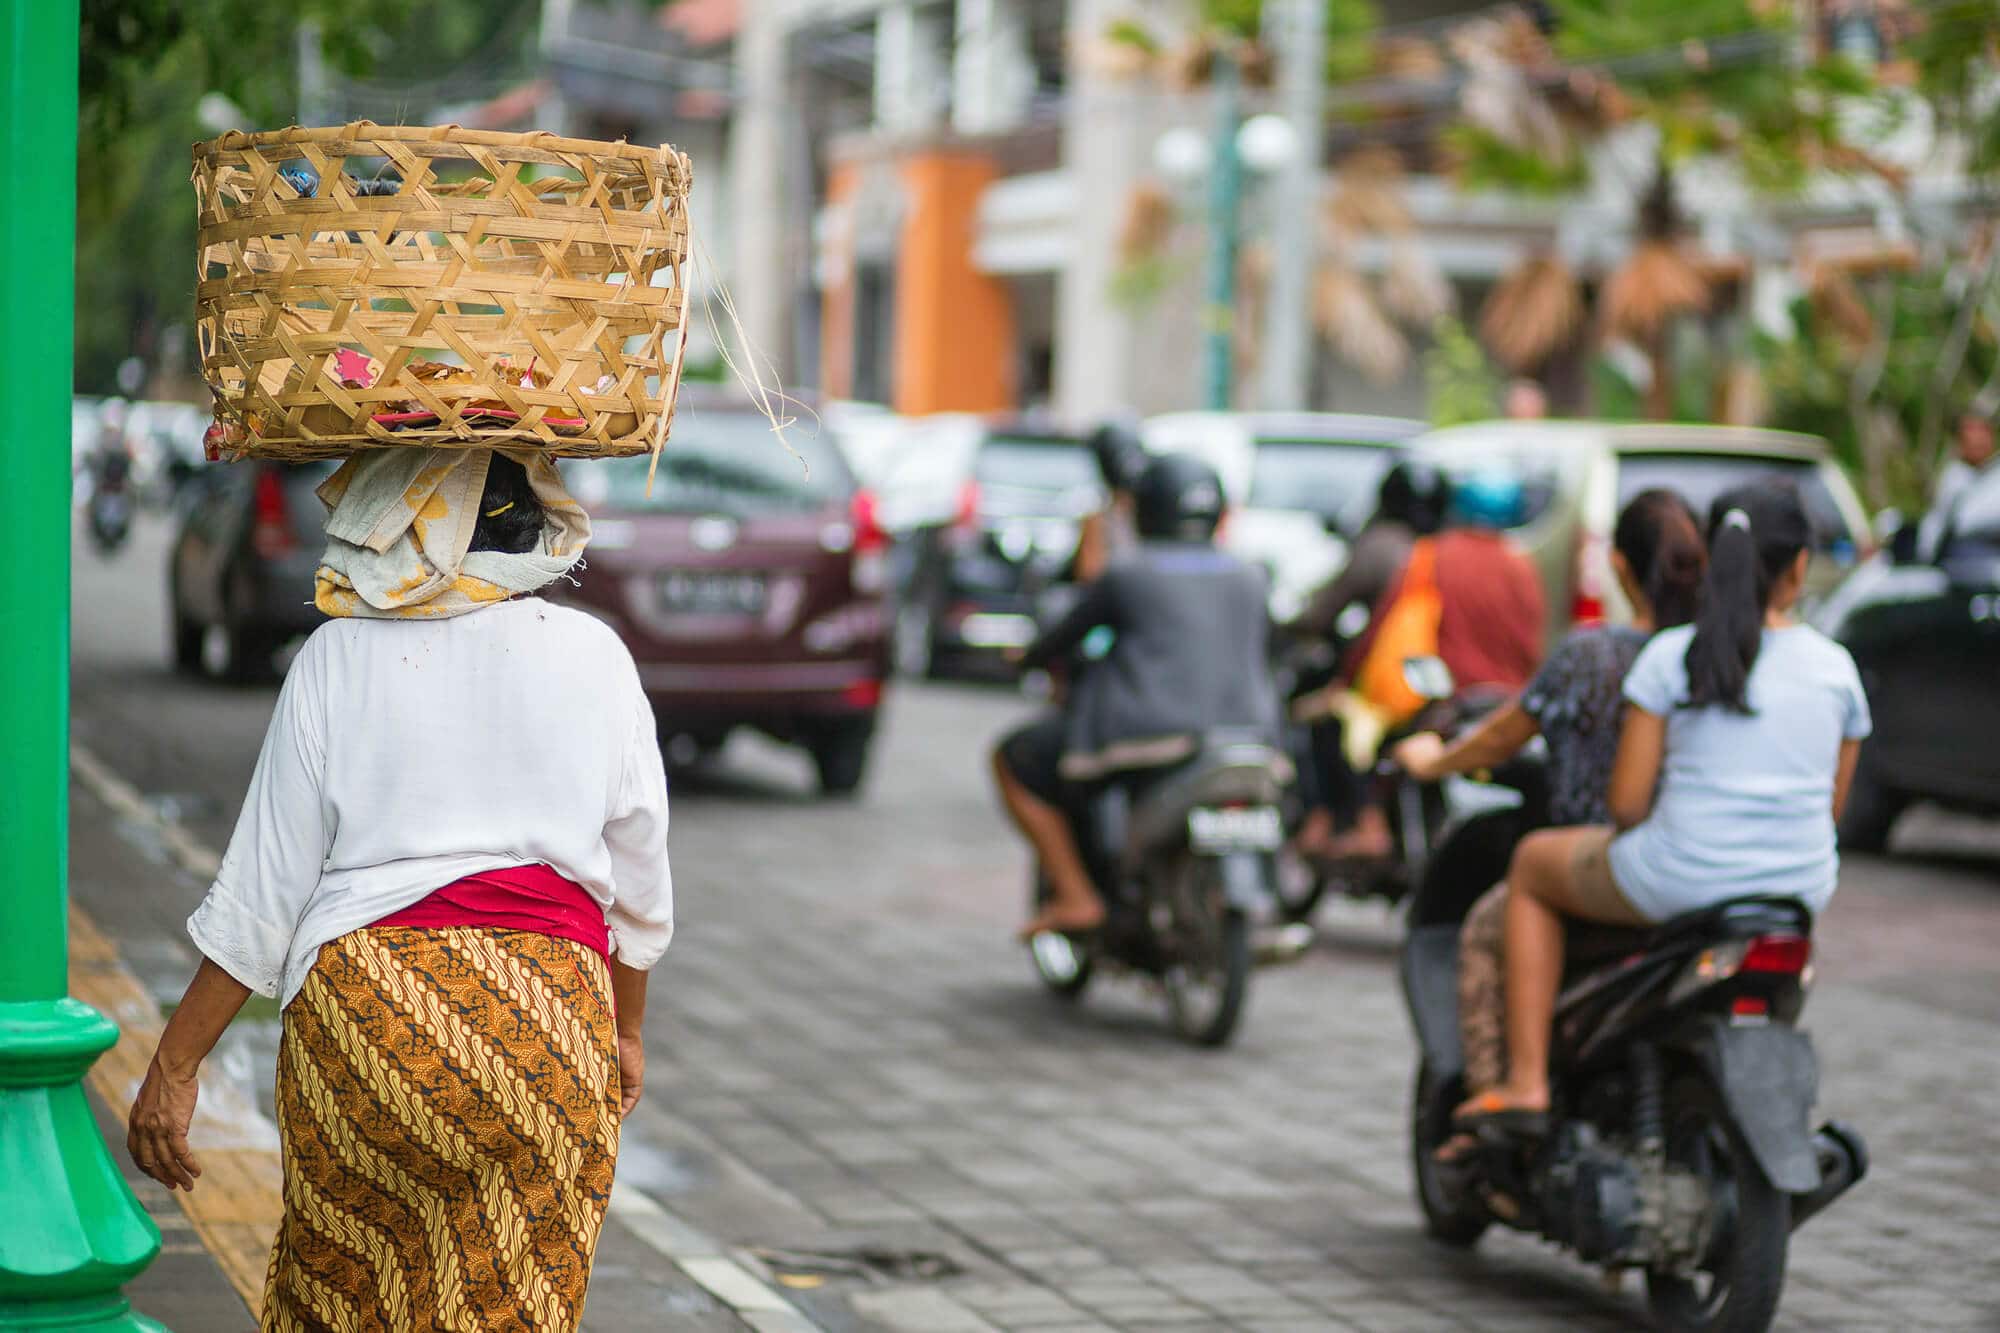 A busy street in Ubud with cars, motorbikes and a Balinese woman walking with a basket on her head. How to get around Ubud during this Ubud itinerary